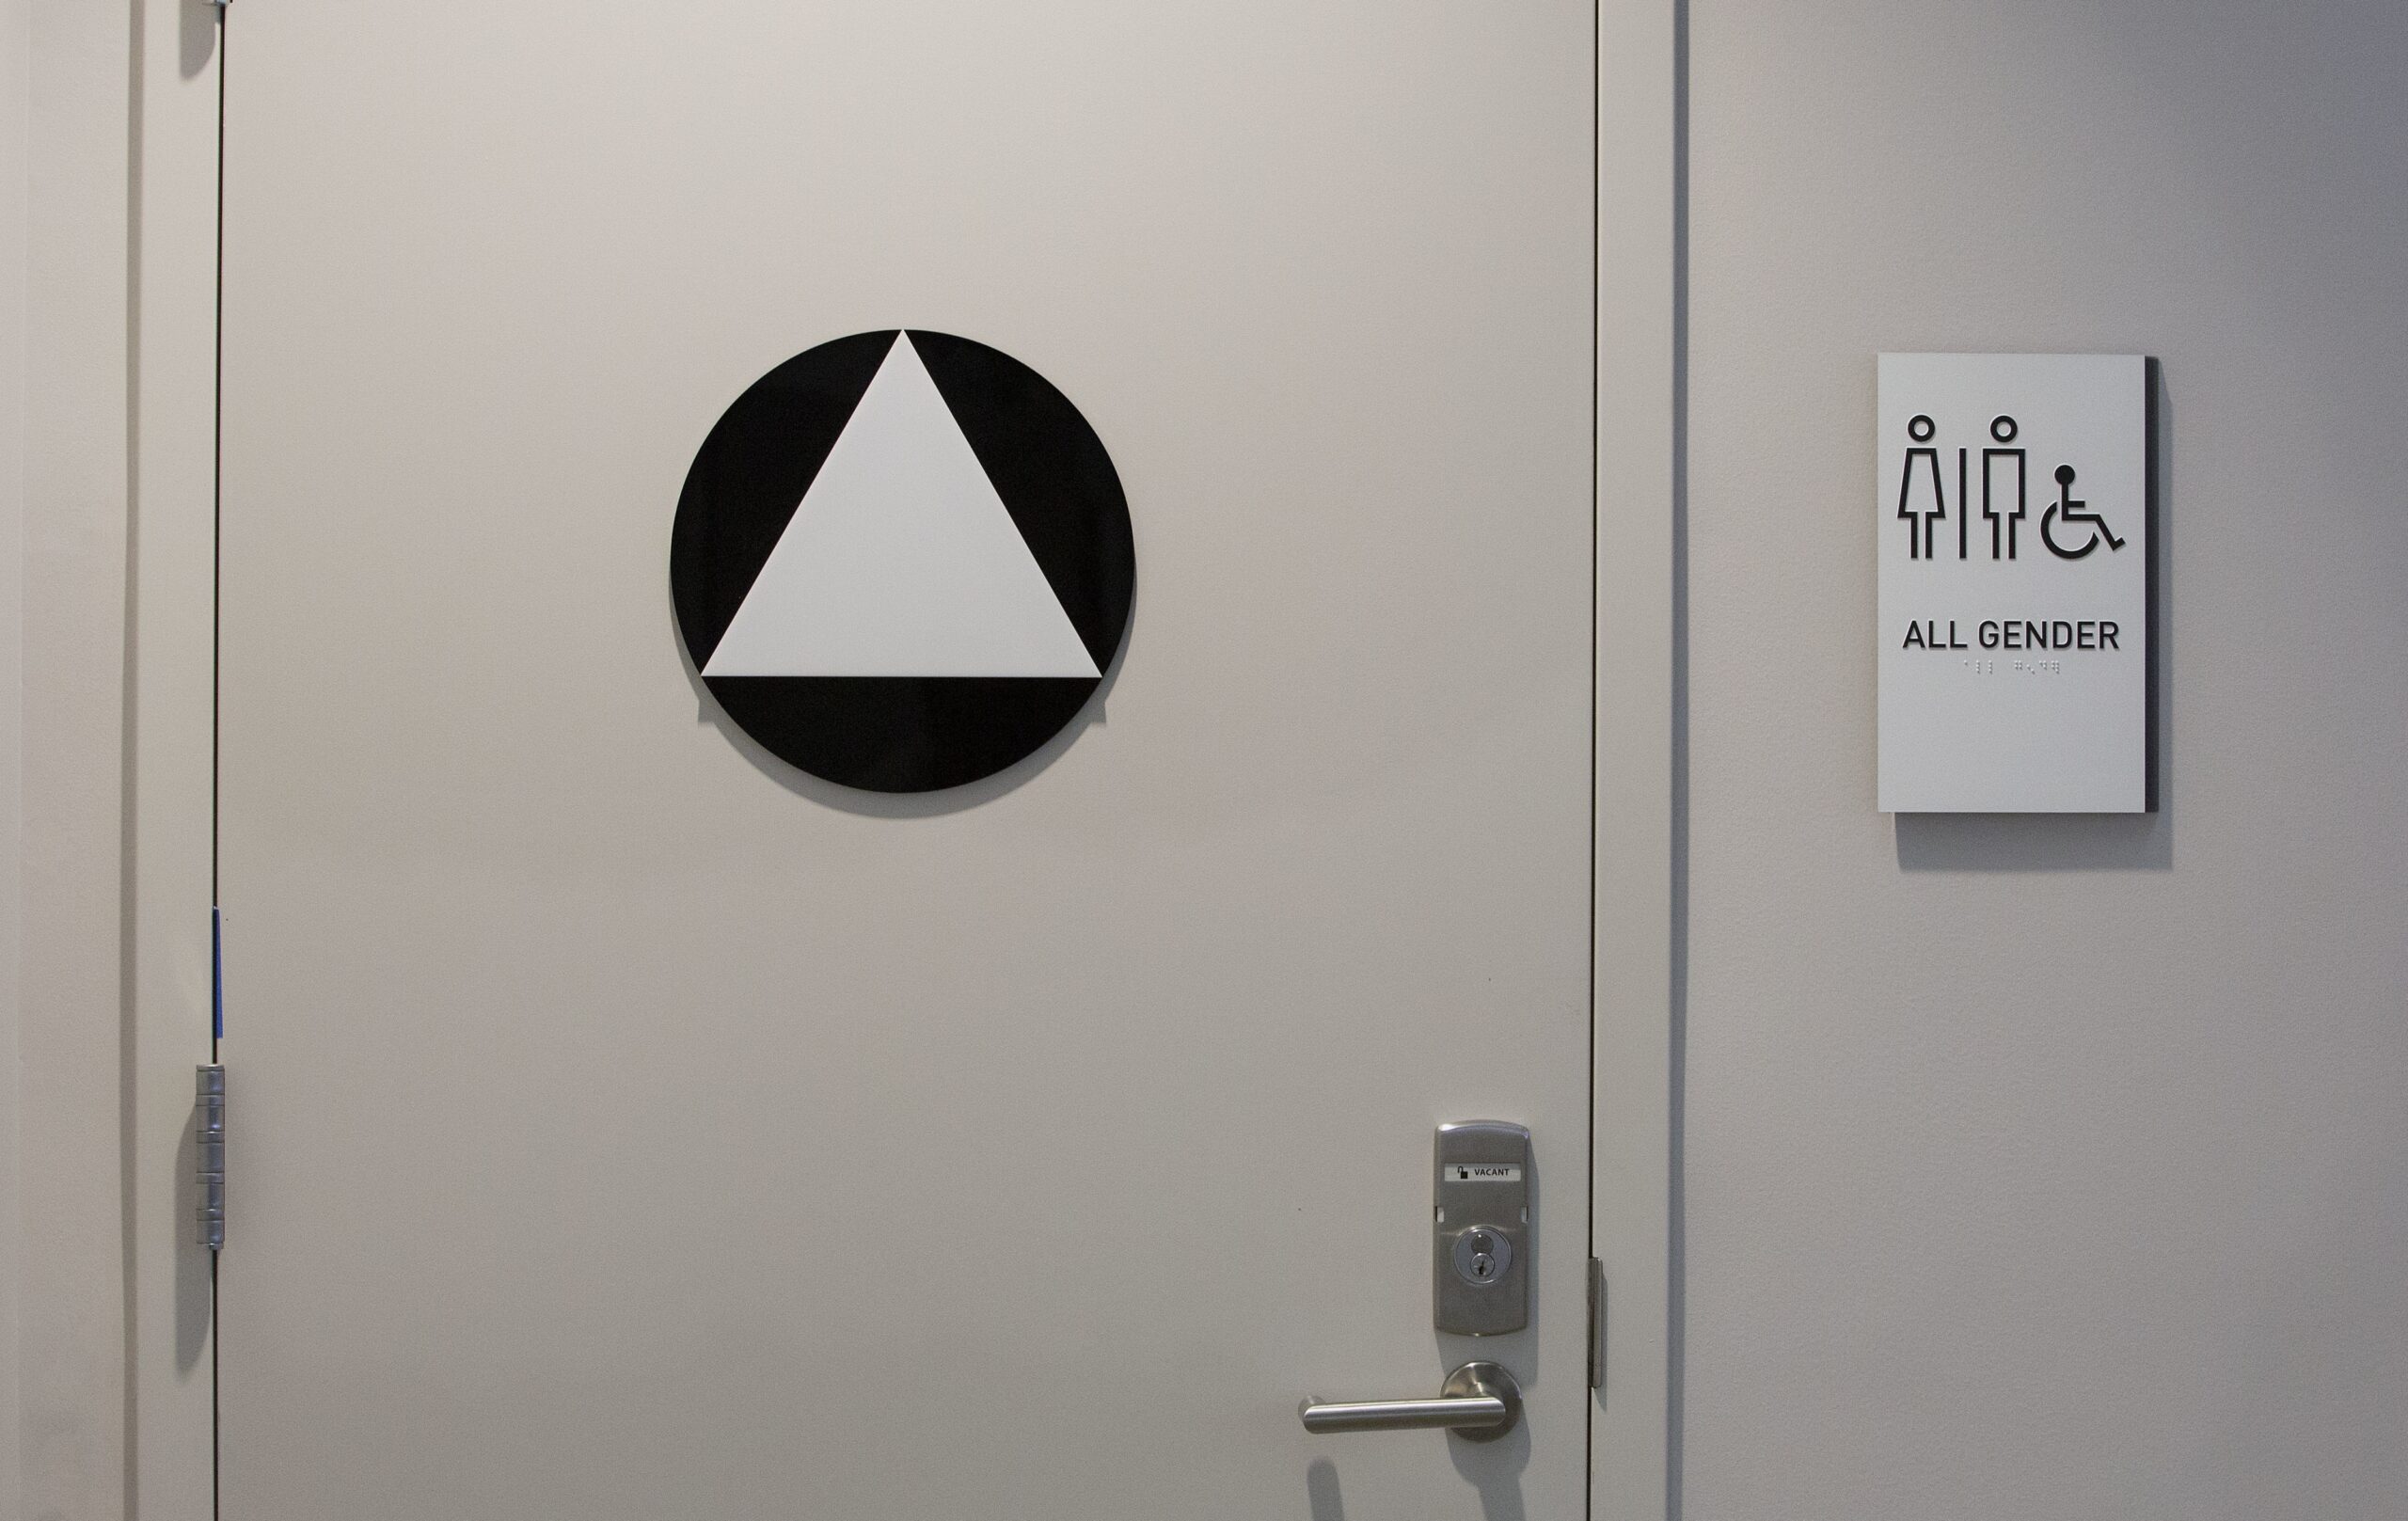 New Park Bathroom In Eau Claire Will Be For All Genders